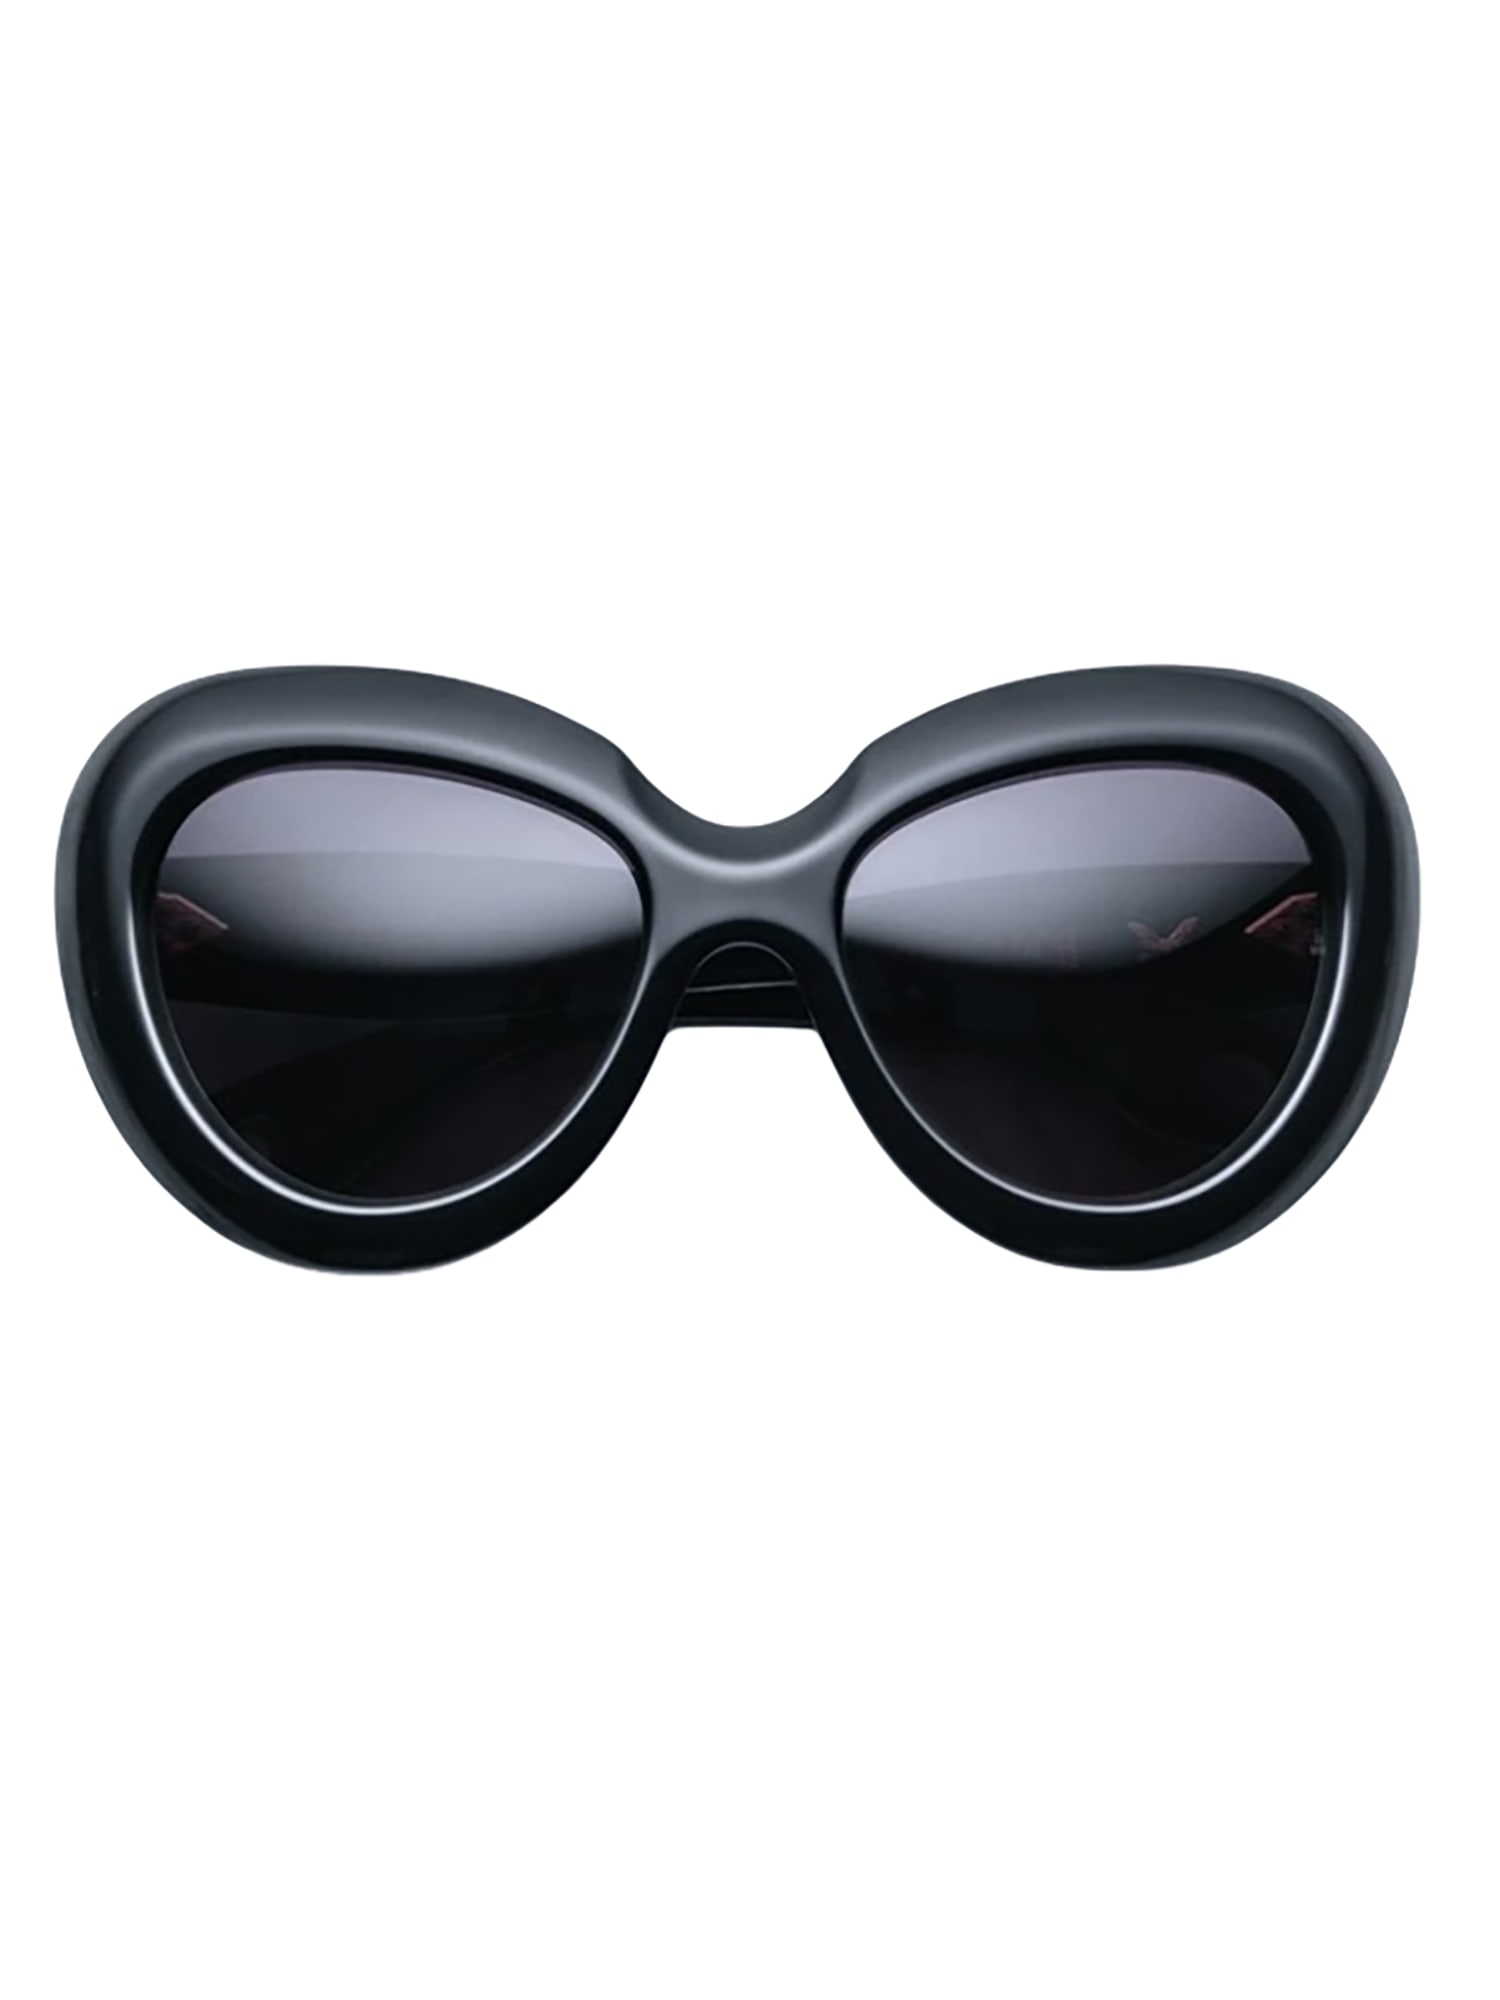 Jacques Marie Mage Monarch Sunglasses In Black